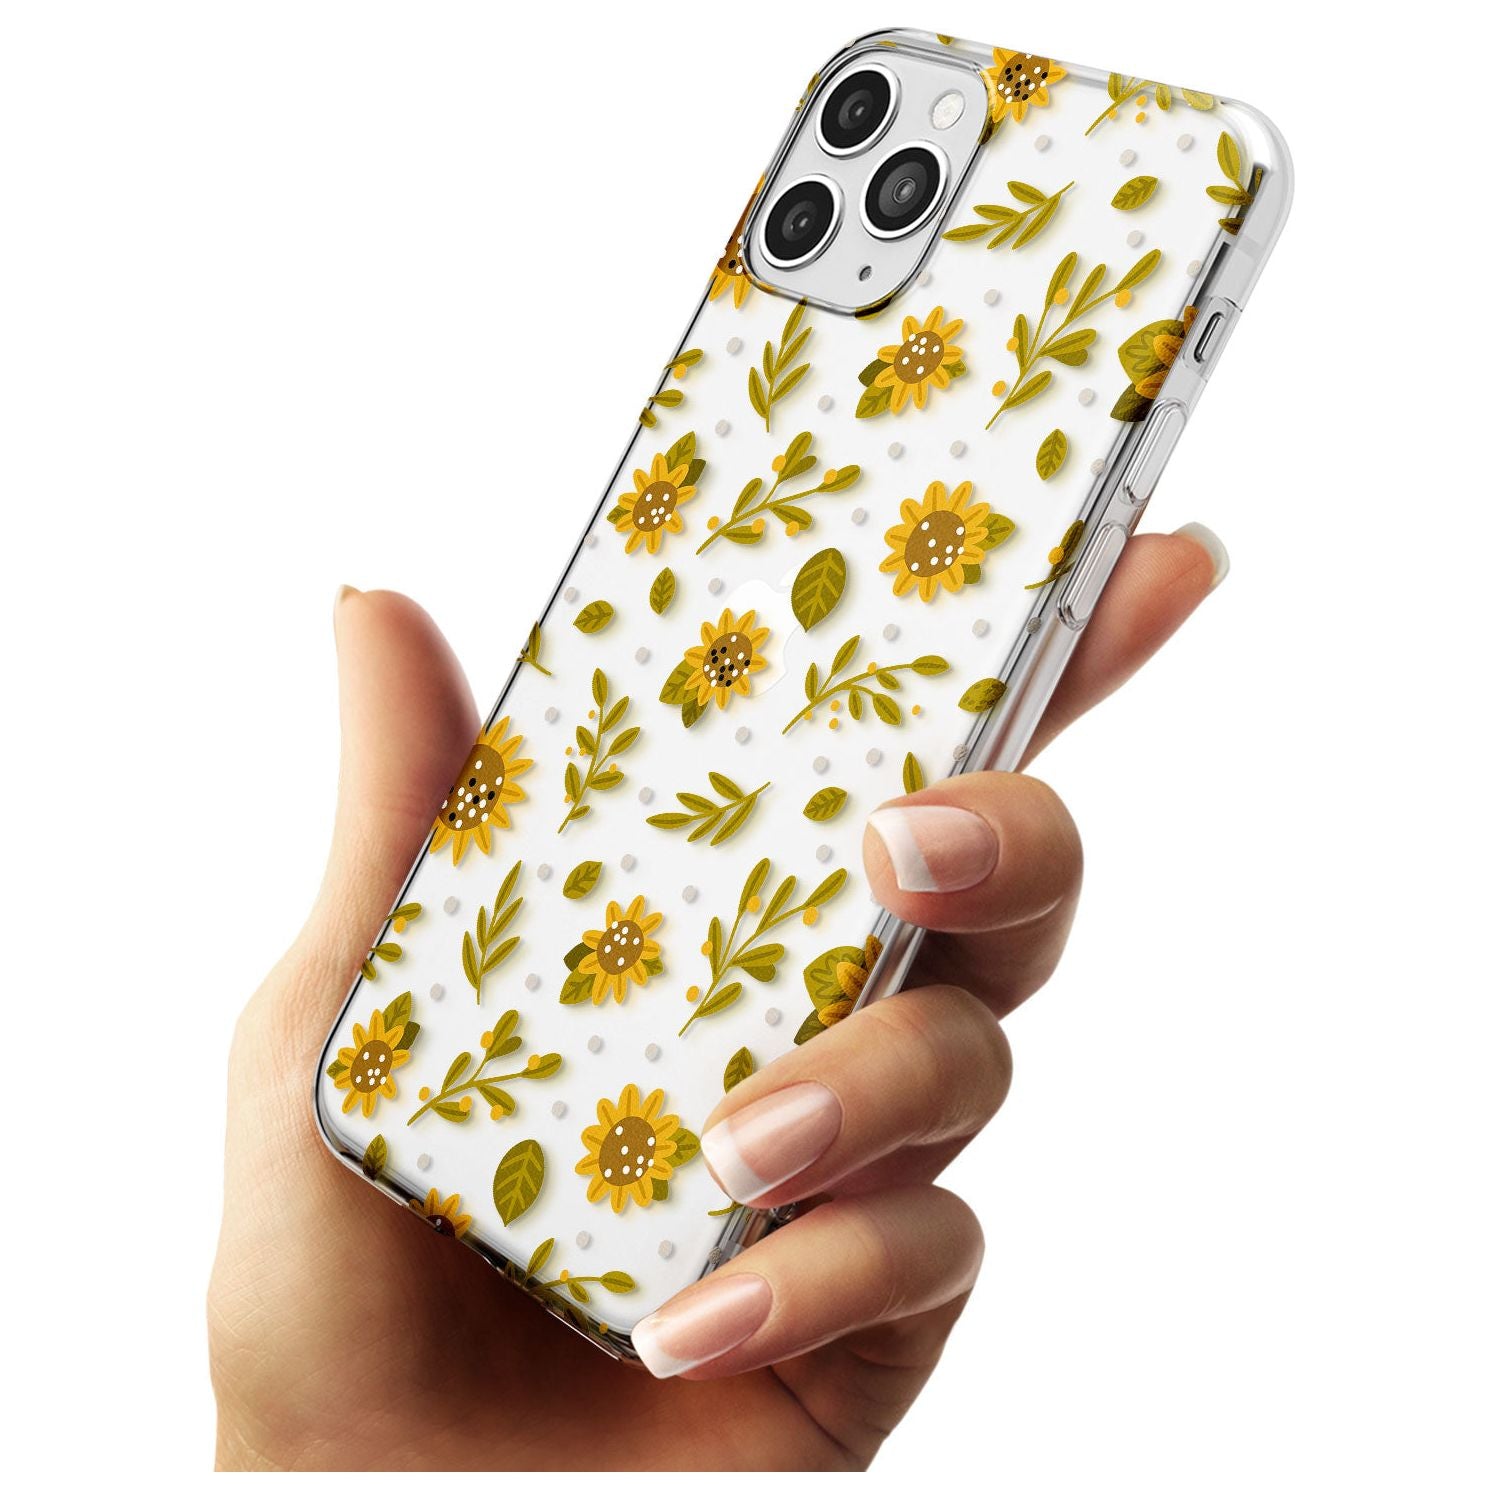 Sweet as Honey Patterns: Sunflowers (Clear) Slim TPU Phone Case for iPhone 11 Pro Max